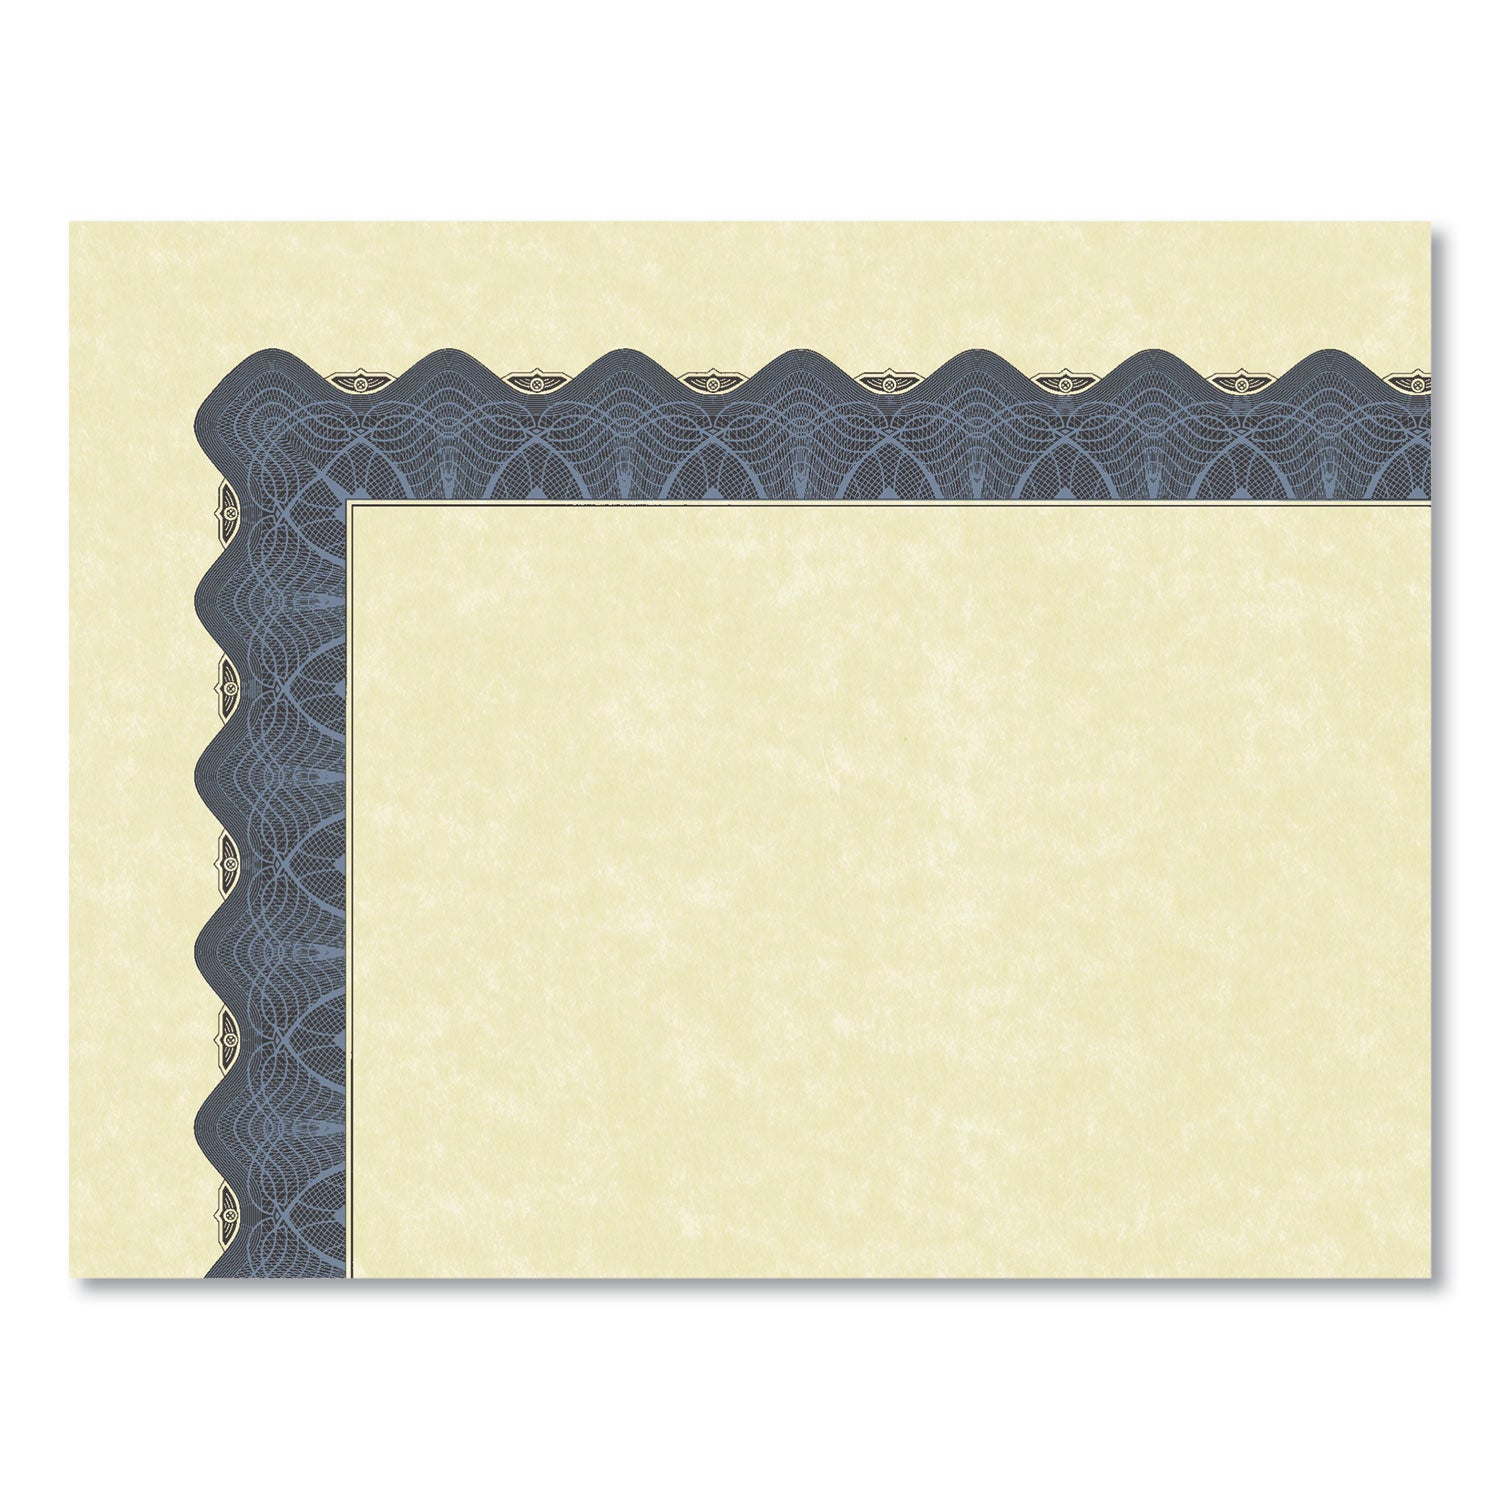 metallic-border-certificates-11-x-85-ivory-blue-with-blue-border-100-pack_grp934400 - 3